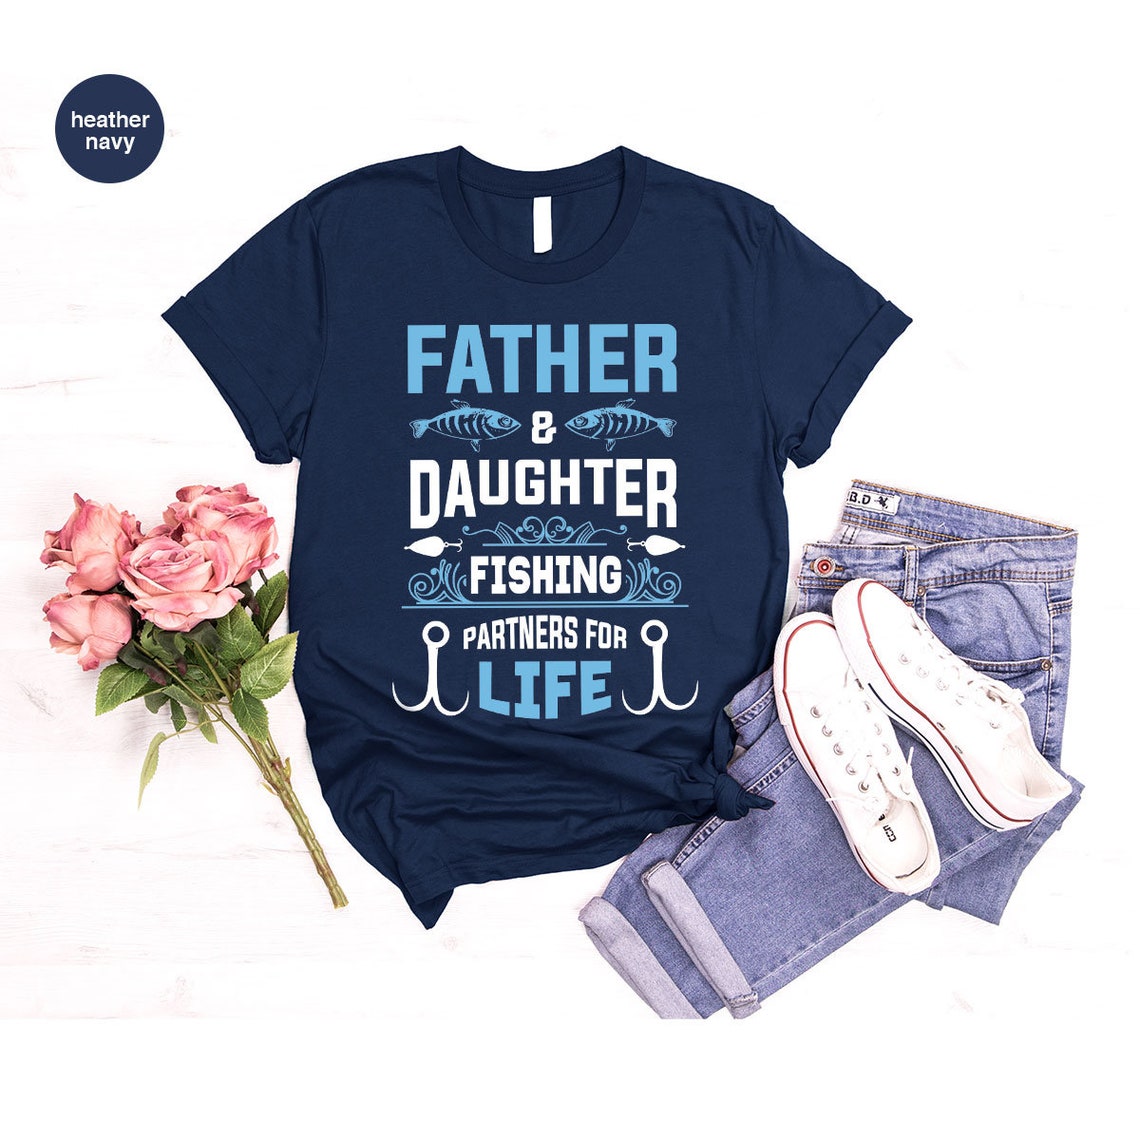 https://stirtshirt.com/wp-content/uploads/2023/02/Father-and-Daughter-Tshirts-for-Fishing-Partners.jpg